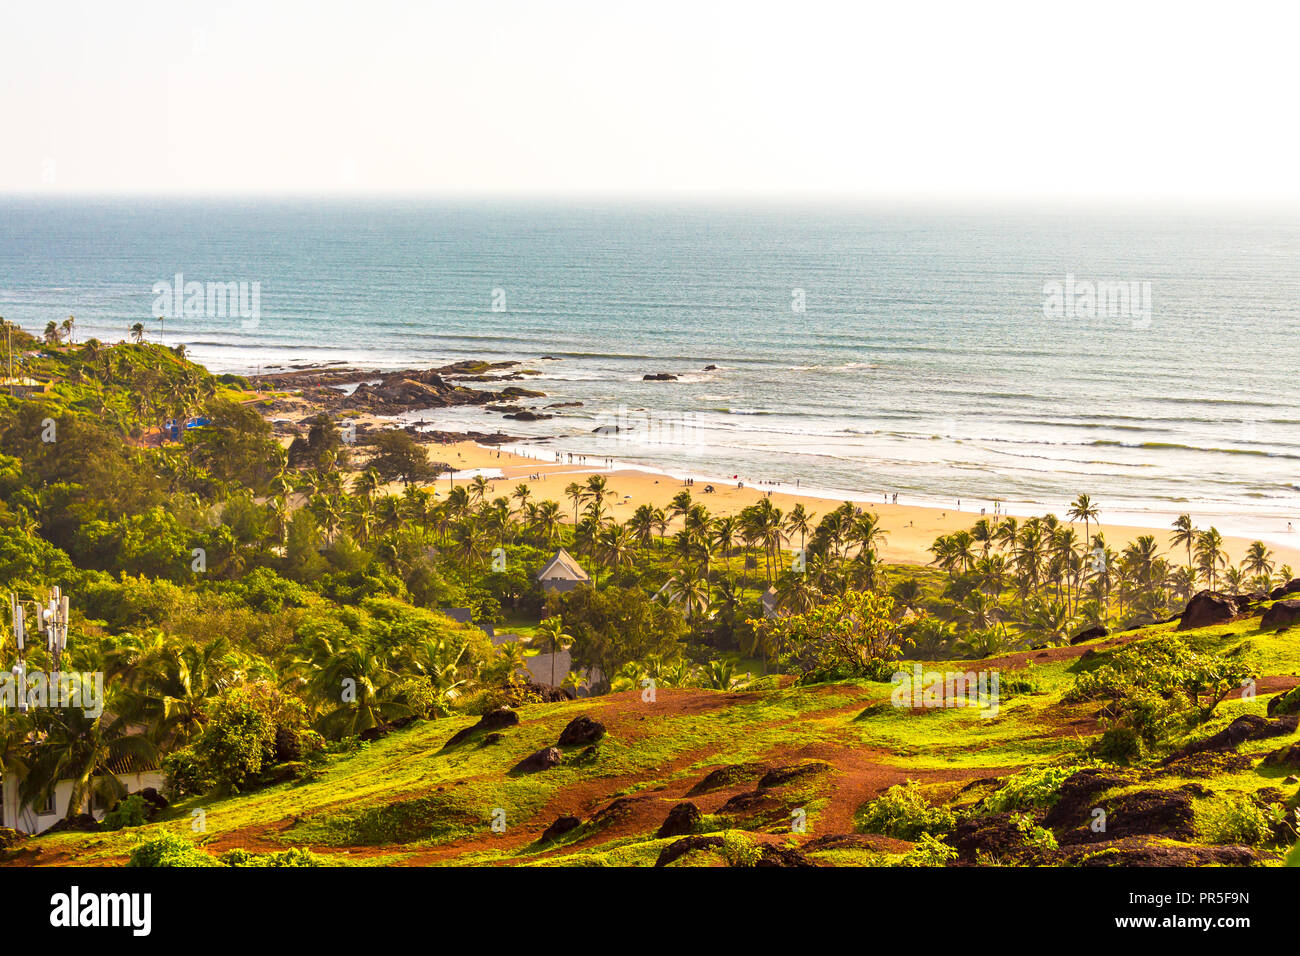 Amazing views of Vagator beach from the top of Chapora Fort, Goa, India, Asia. Vagator Beach is one of the most beautiful beaches in North Goa. Stock Photo